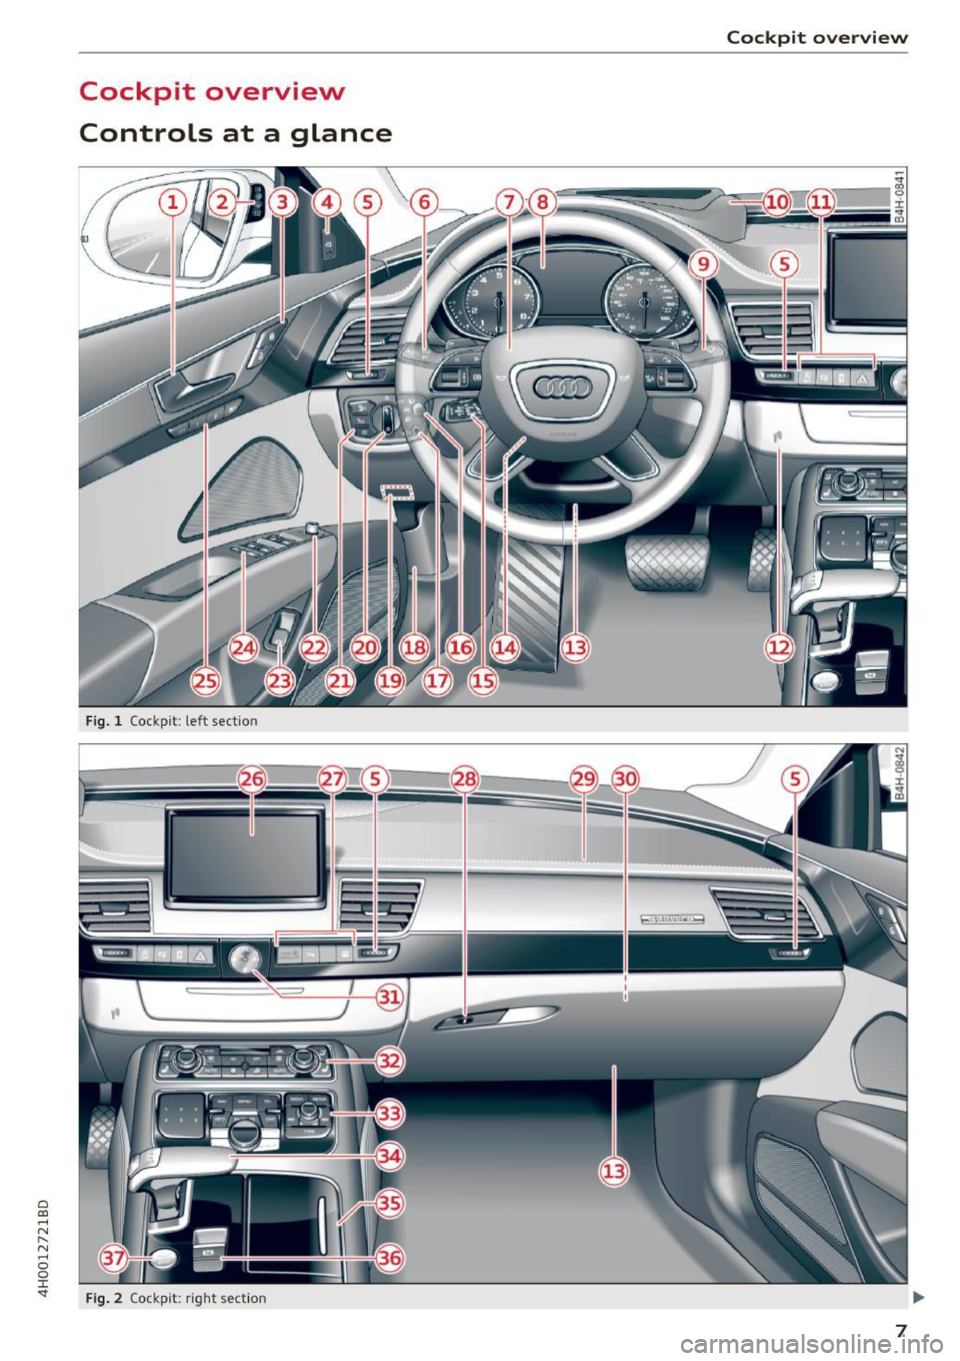 AUDI A8 2017  Owners Manual C) C0 .... 
" " " .... 0 0 :r <t 
Cockpit  overview 
Controls  at  a  glance 
Fig.  1 Cockp it :  left  sec tion 
Fig. 2  Cockpit:  righ t sect io n 
Cockpit  overview 
7  